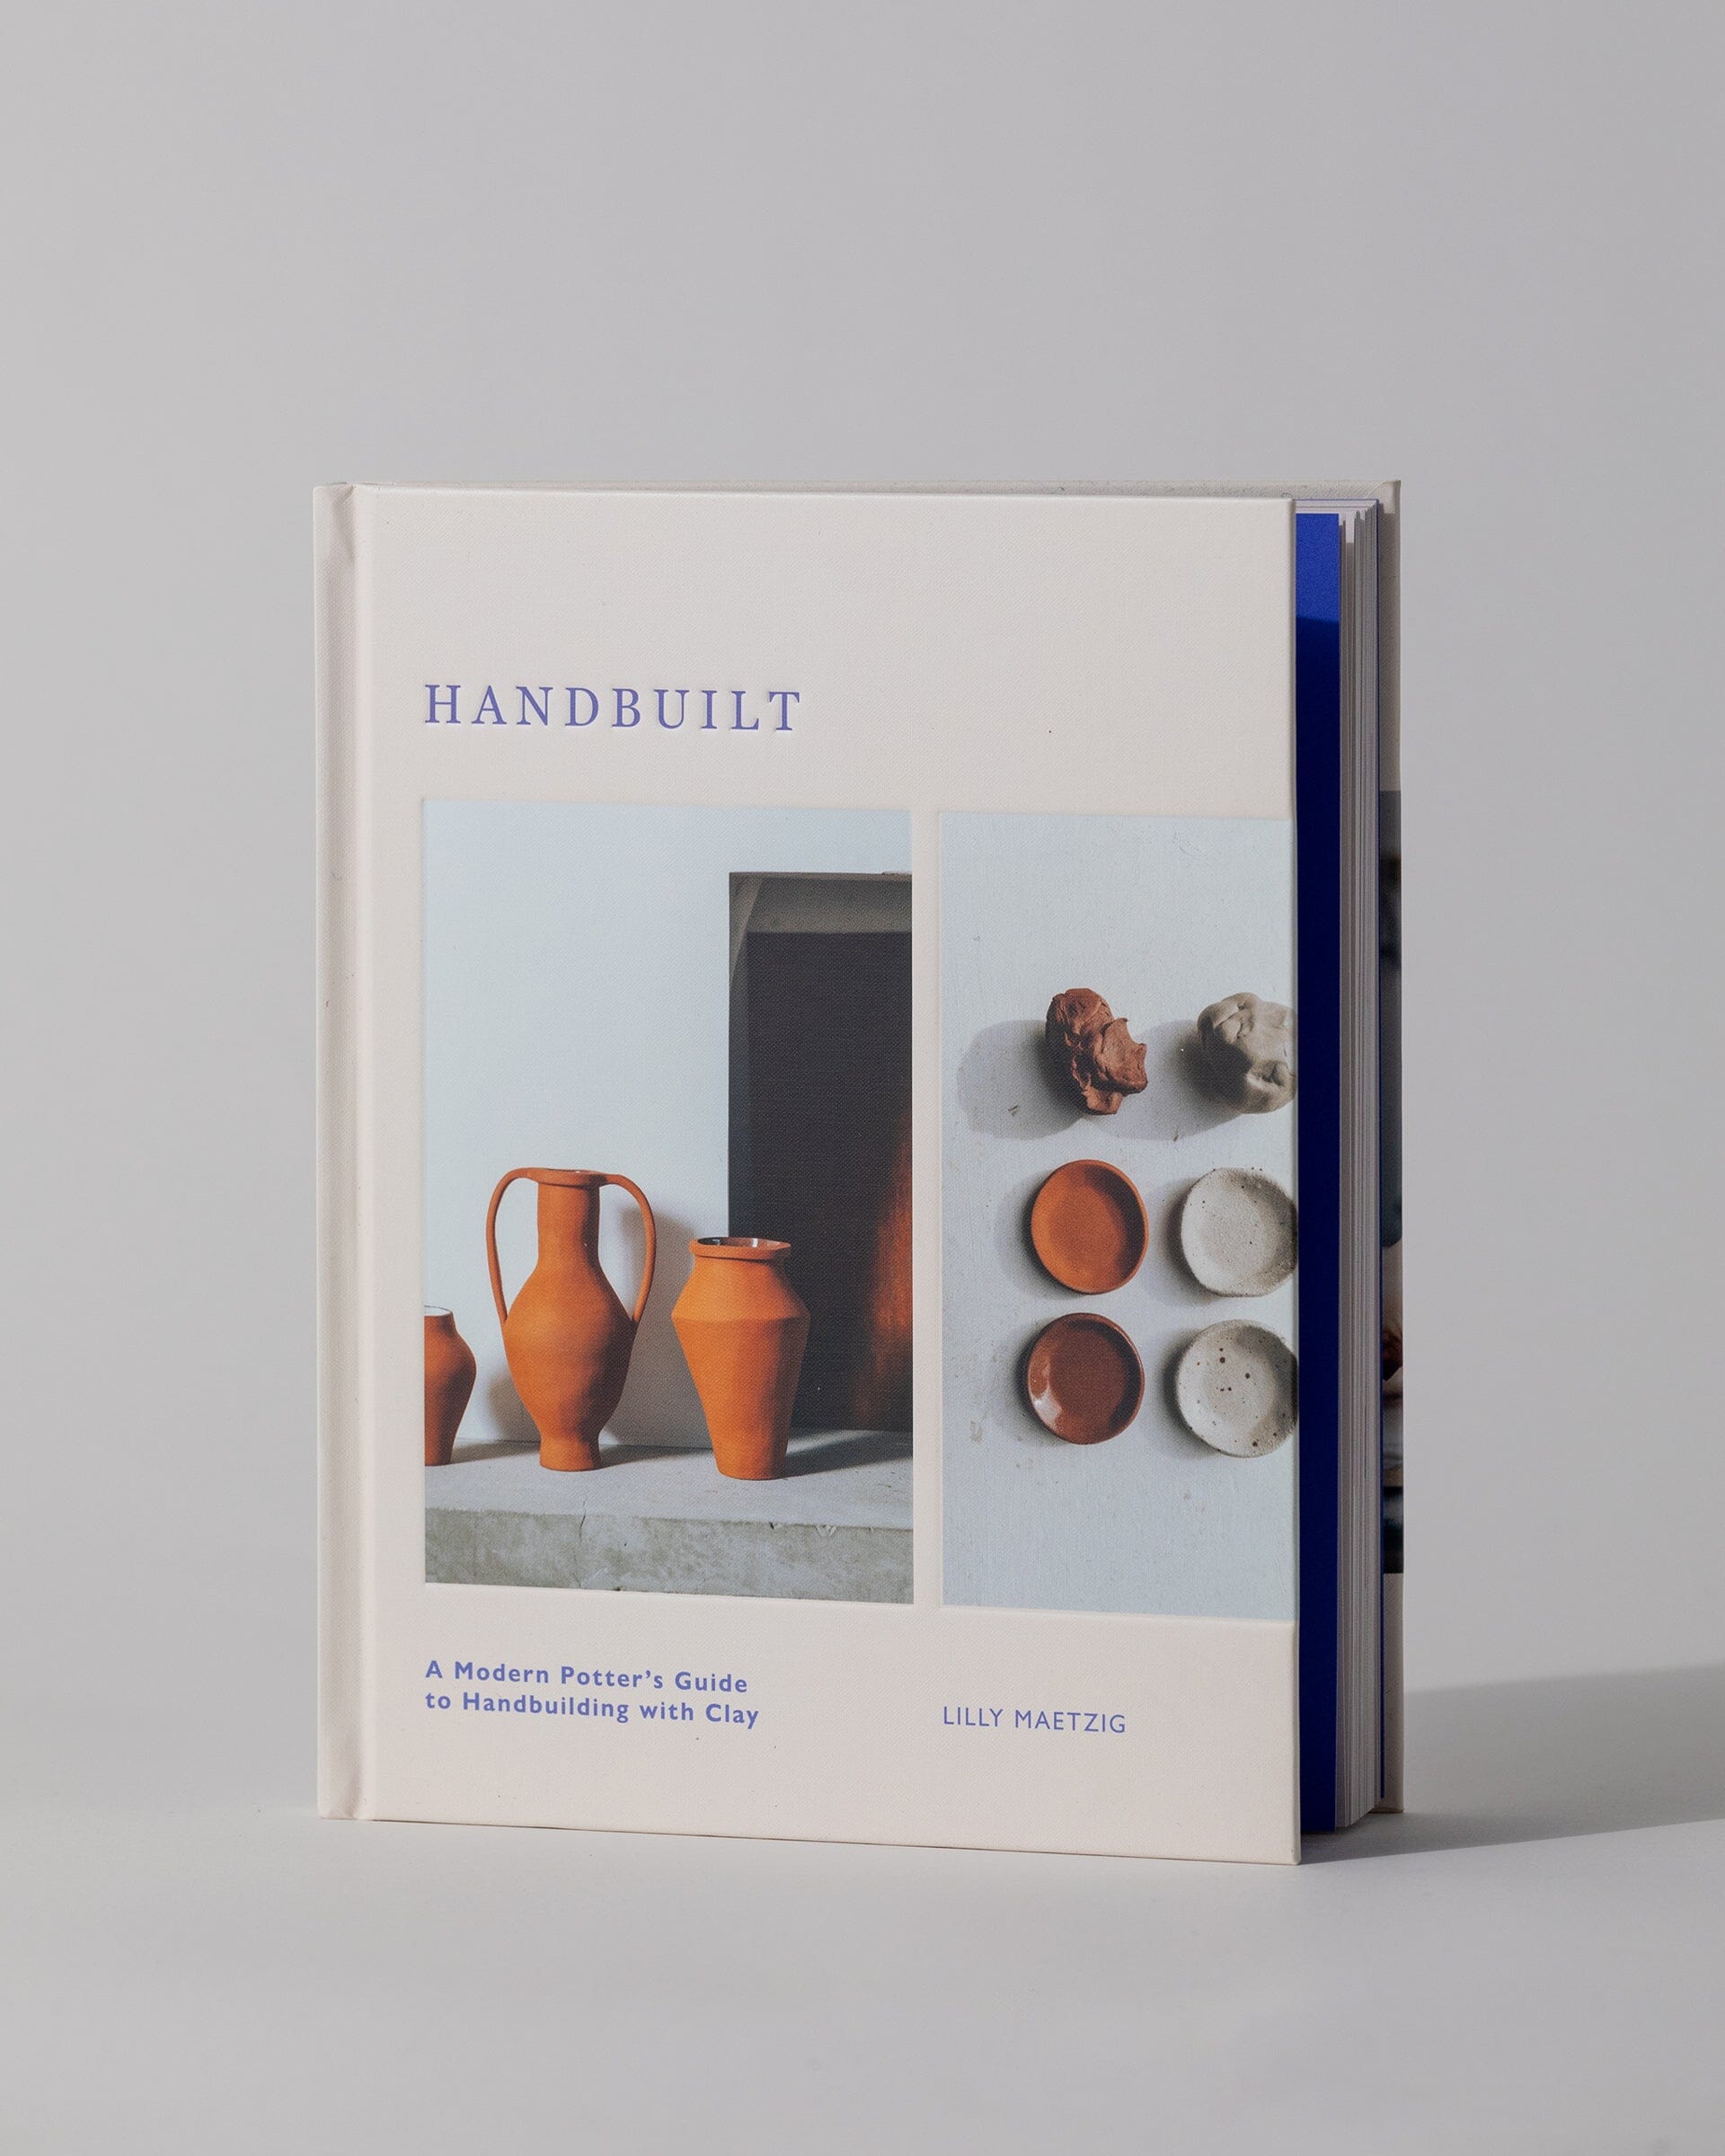 Handbuilt: A Modern Potter's Guide to Handbuilding With Clay 2